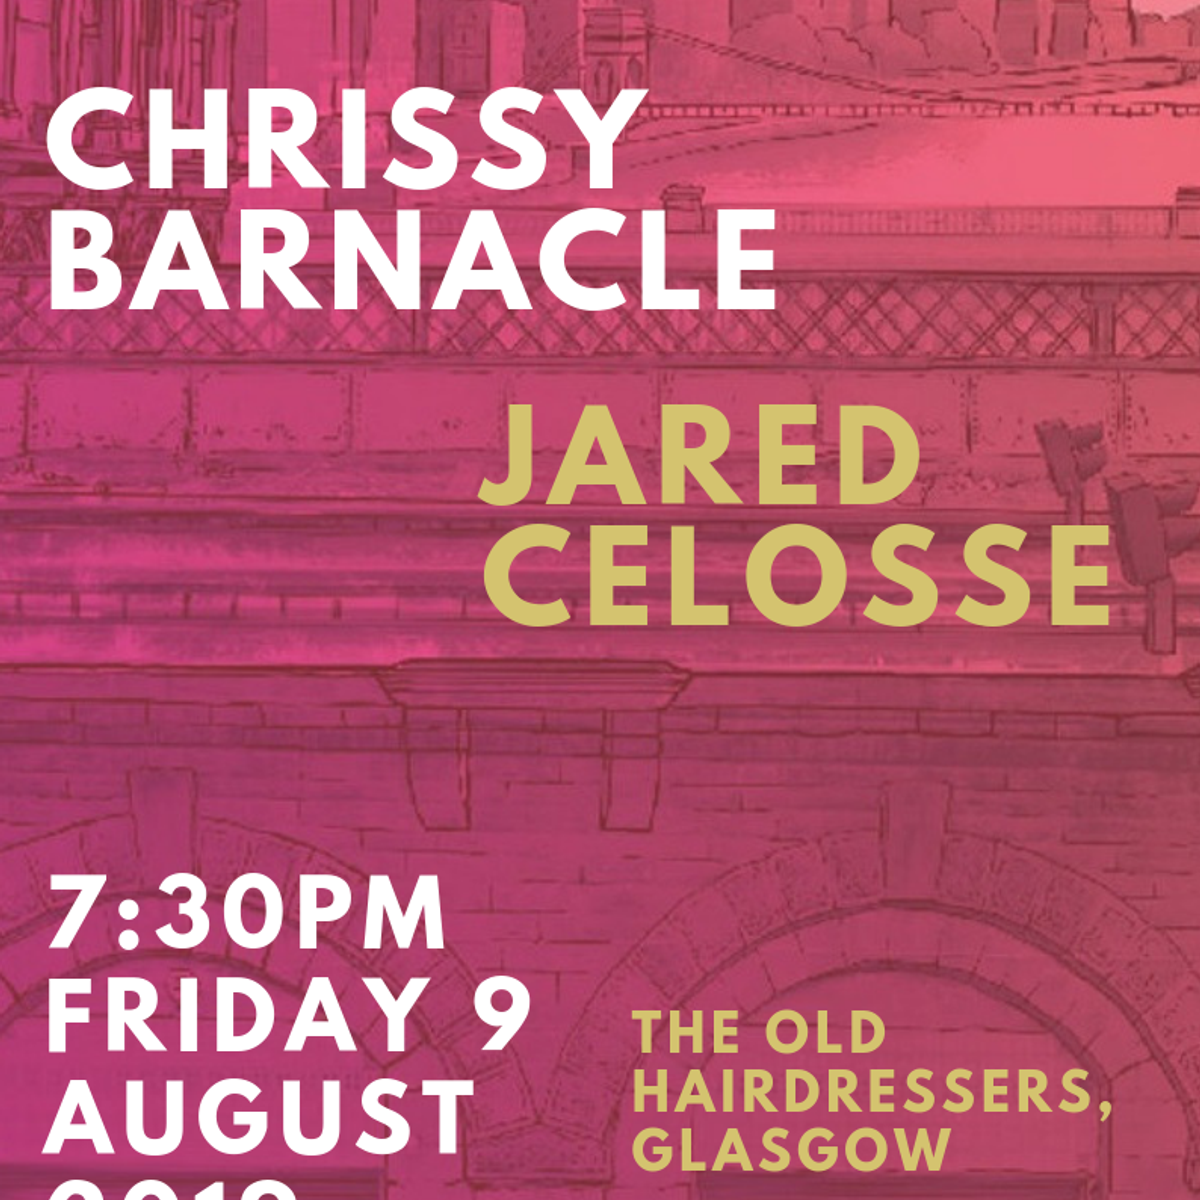 Chrissy Barnacle Jared Celosse Archipelago Eps Launch At The